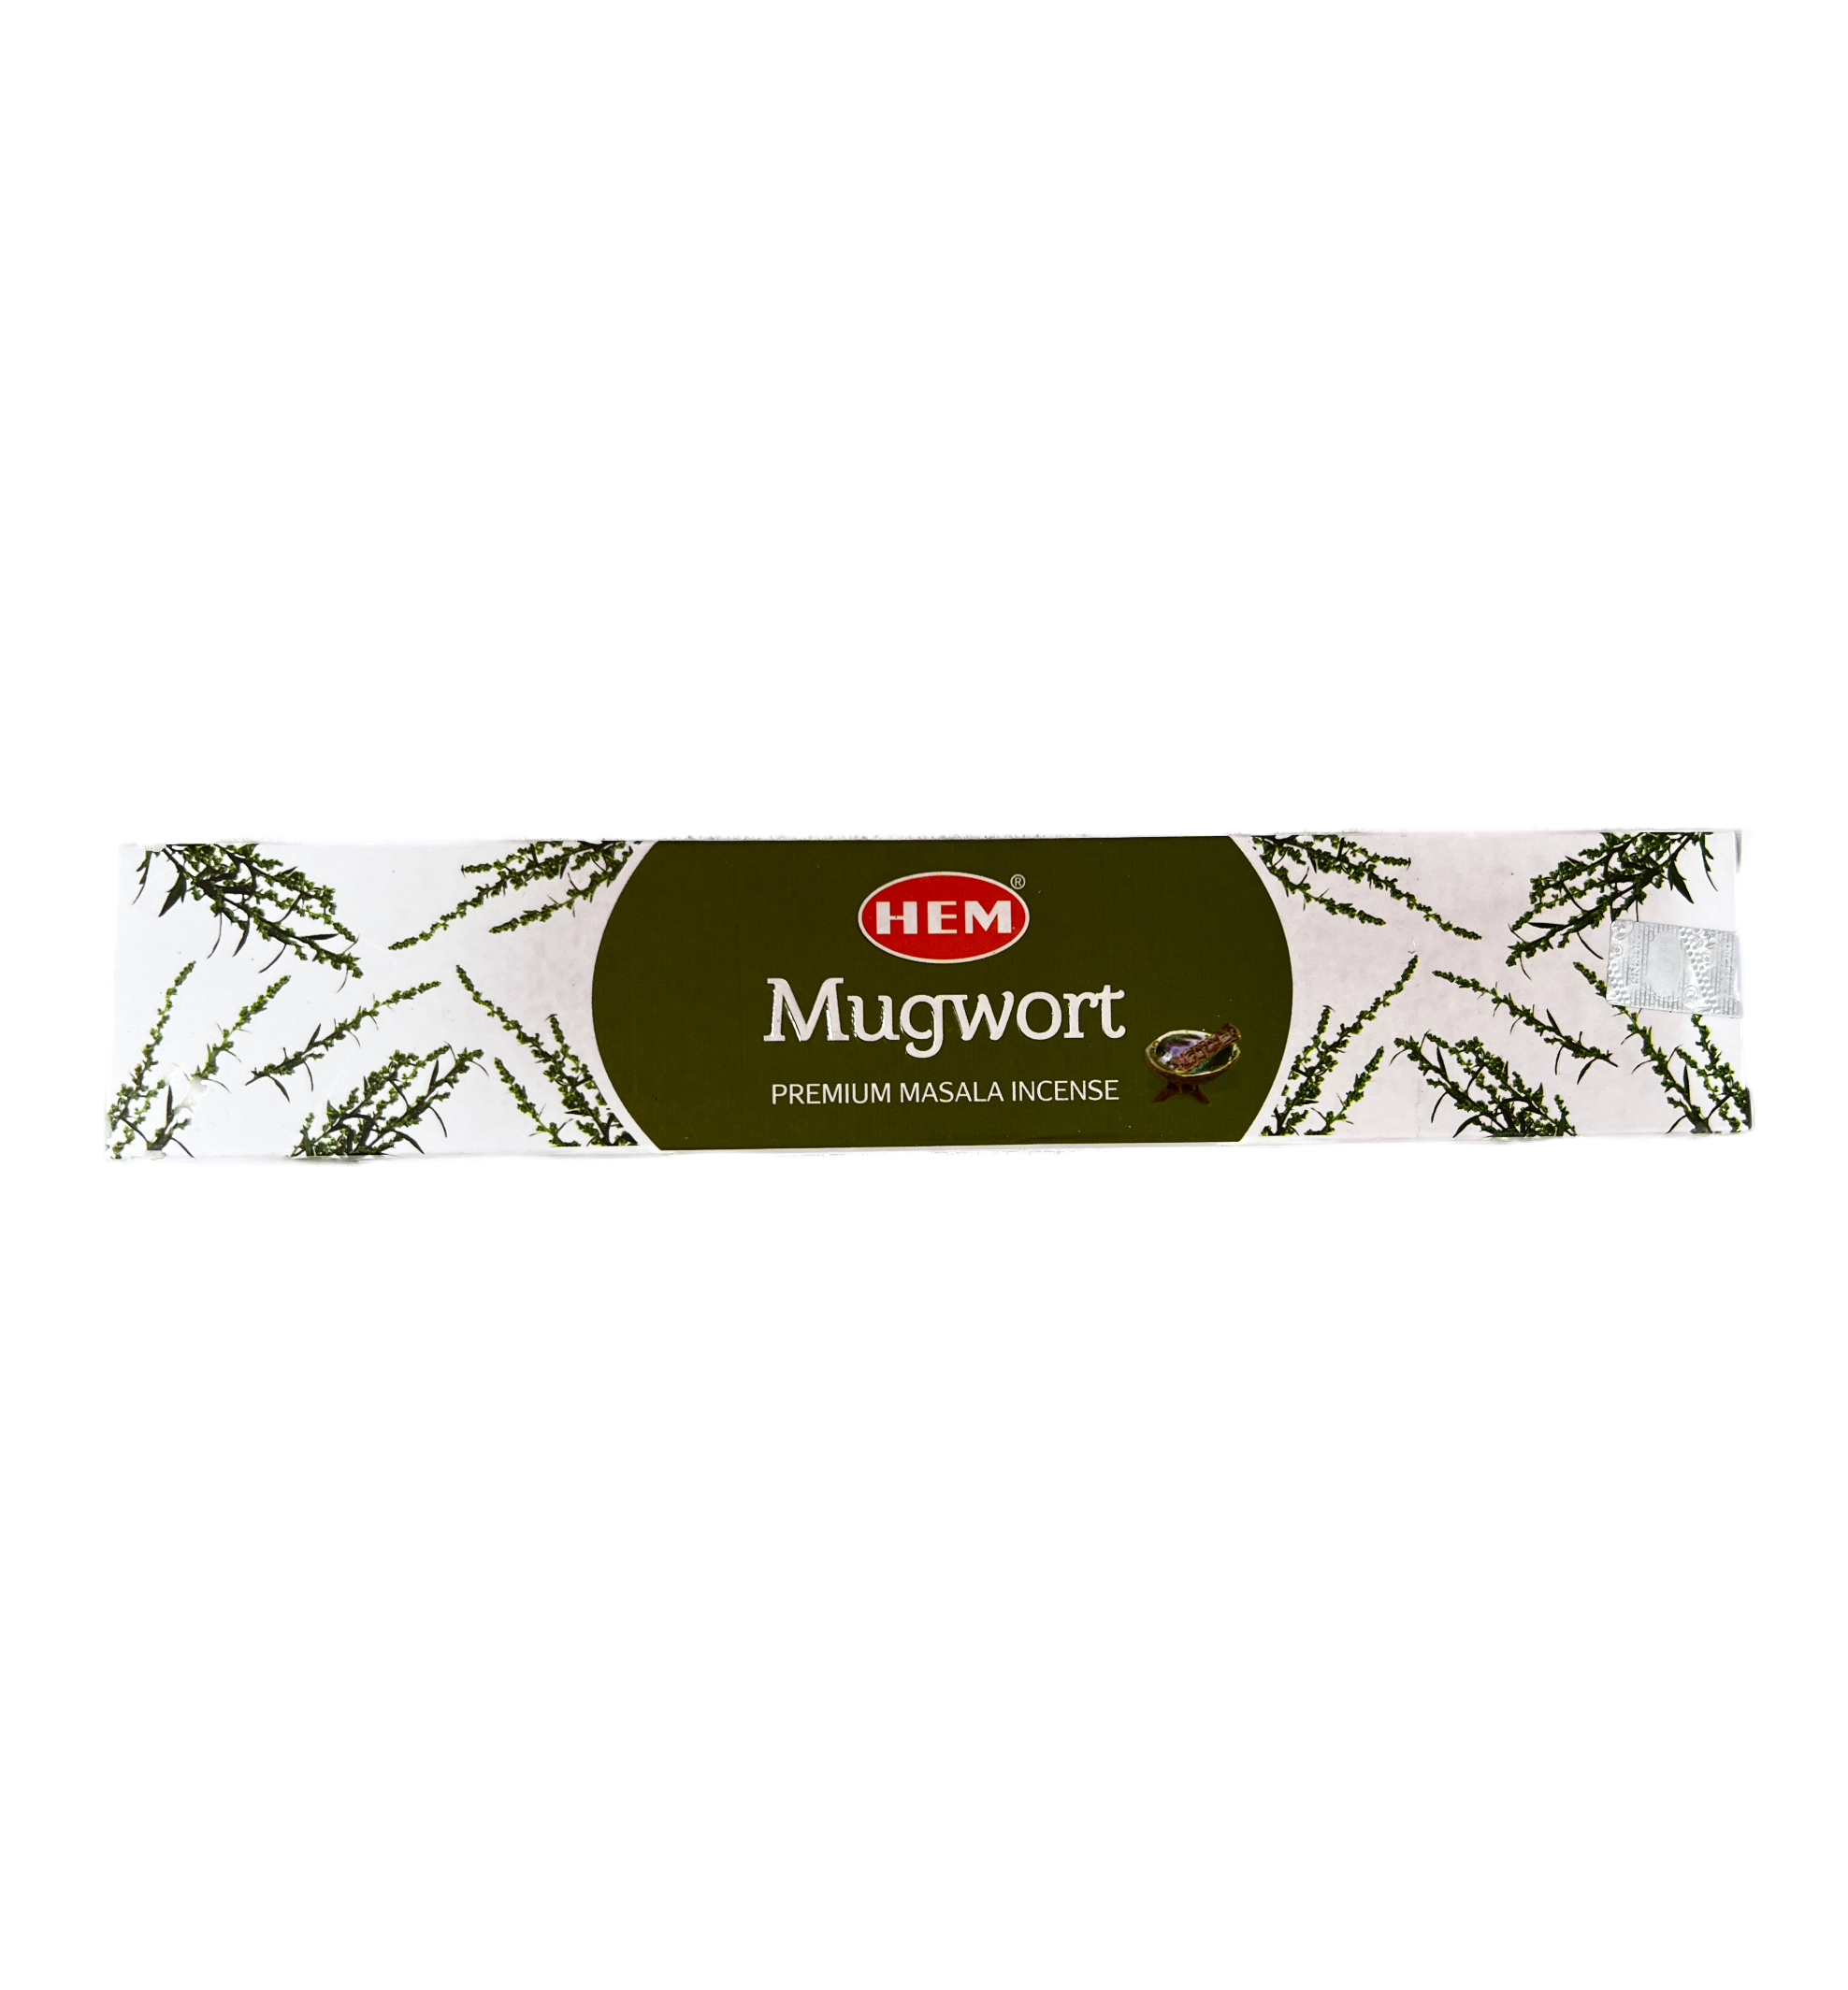 Mugwort Incense Sticks. The front cover has a white background with drawings of mugwort as designs. The center is a green oval shape. Inside, the top line has a red oval with the company name in it Hem. Below it says Mugwort Premium Masala Incense.